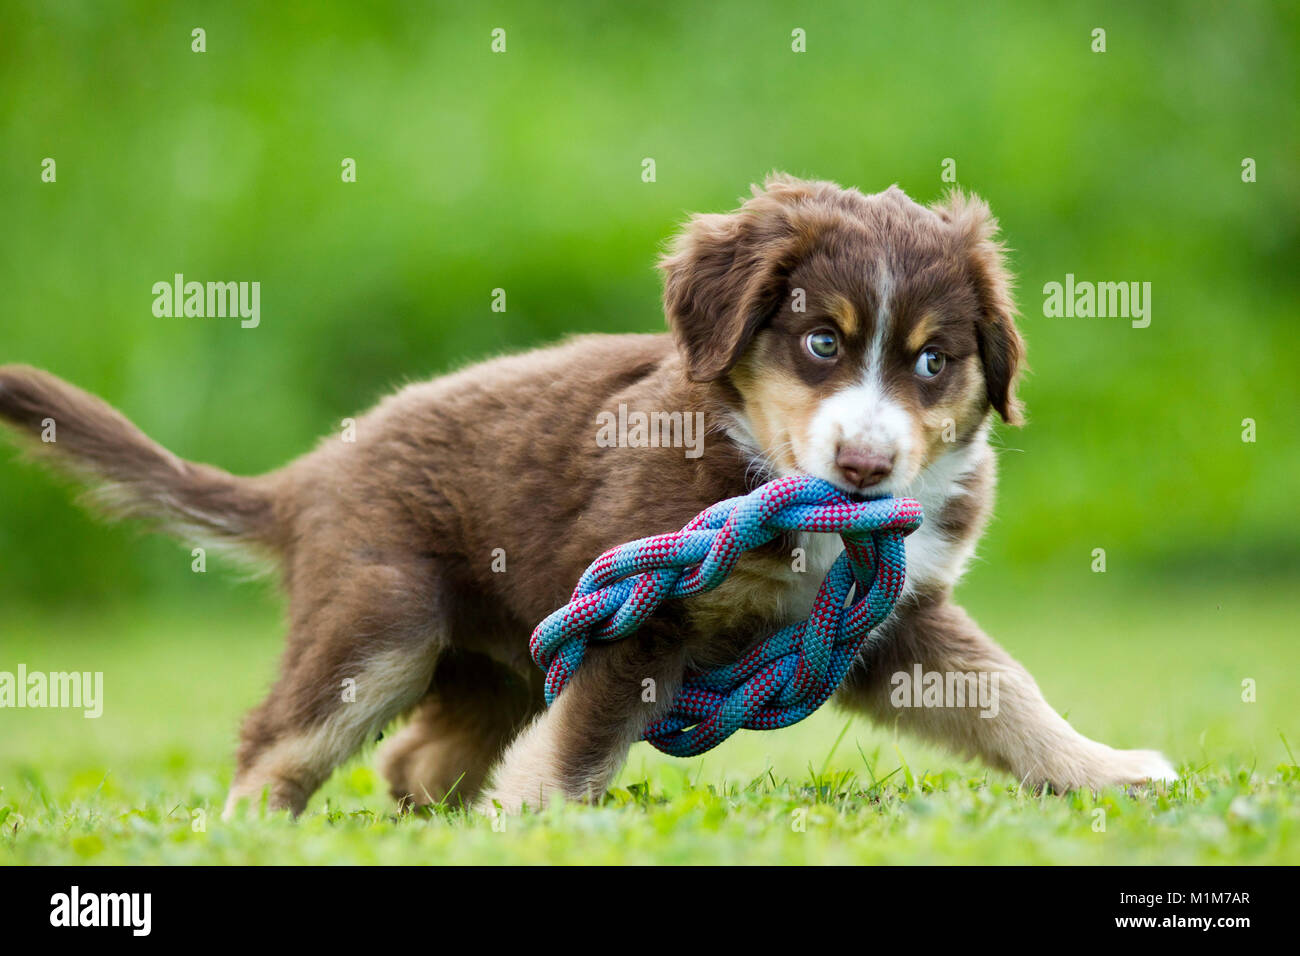 Australian Shepherd. Puppy running on grass while fetching a multicoloured rope. Germany Stock Photo